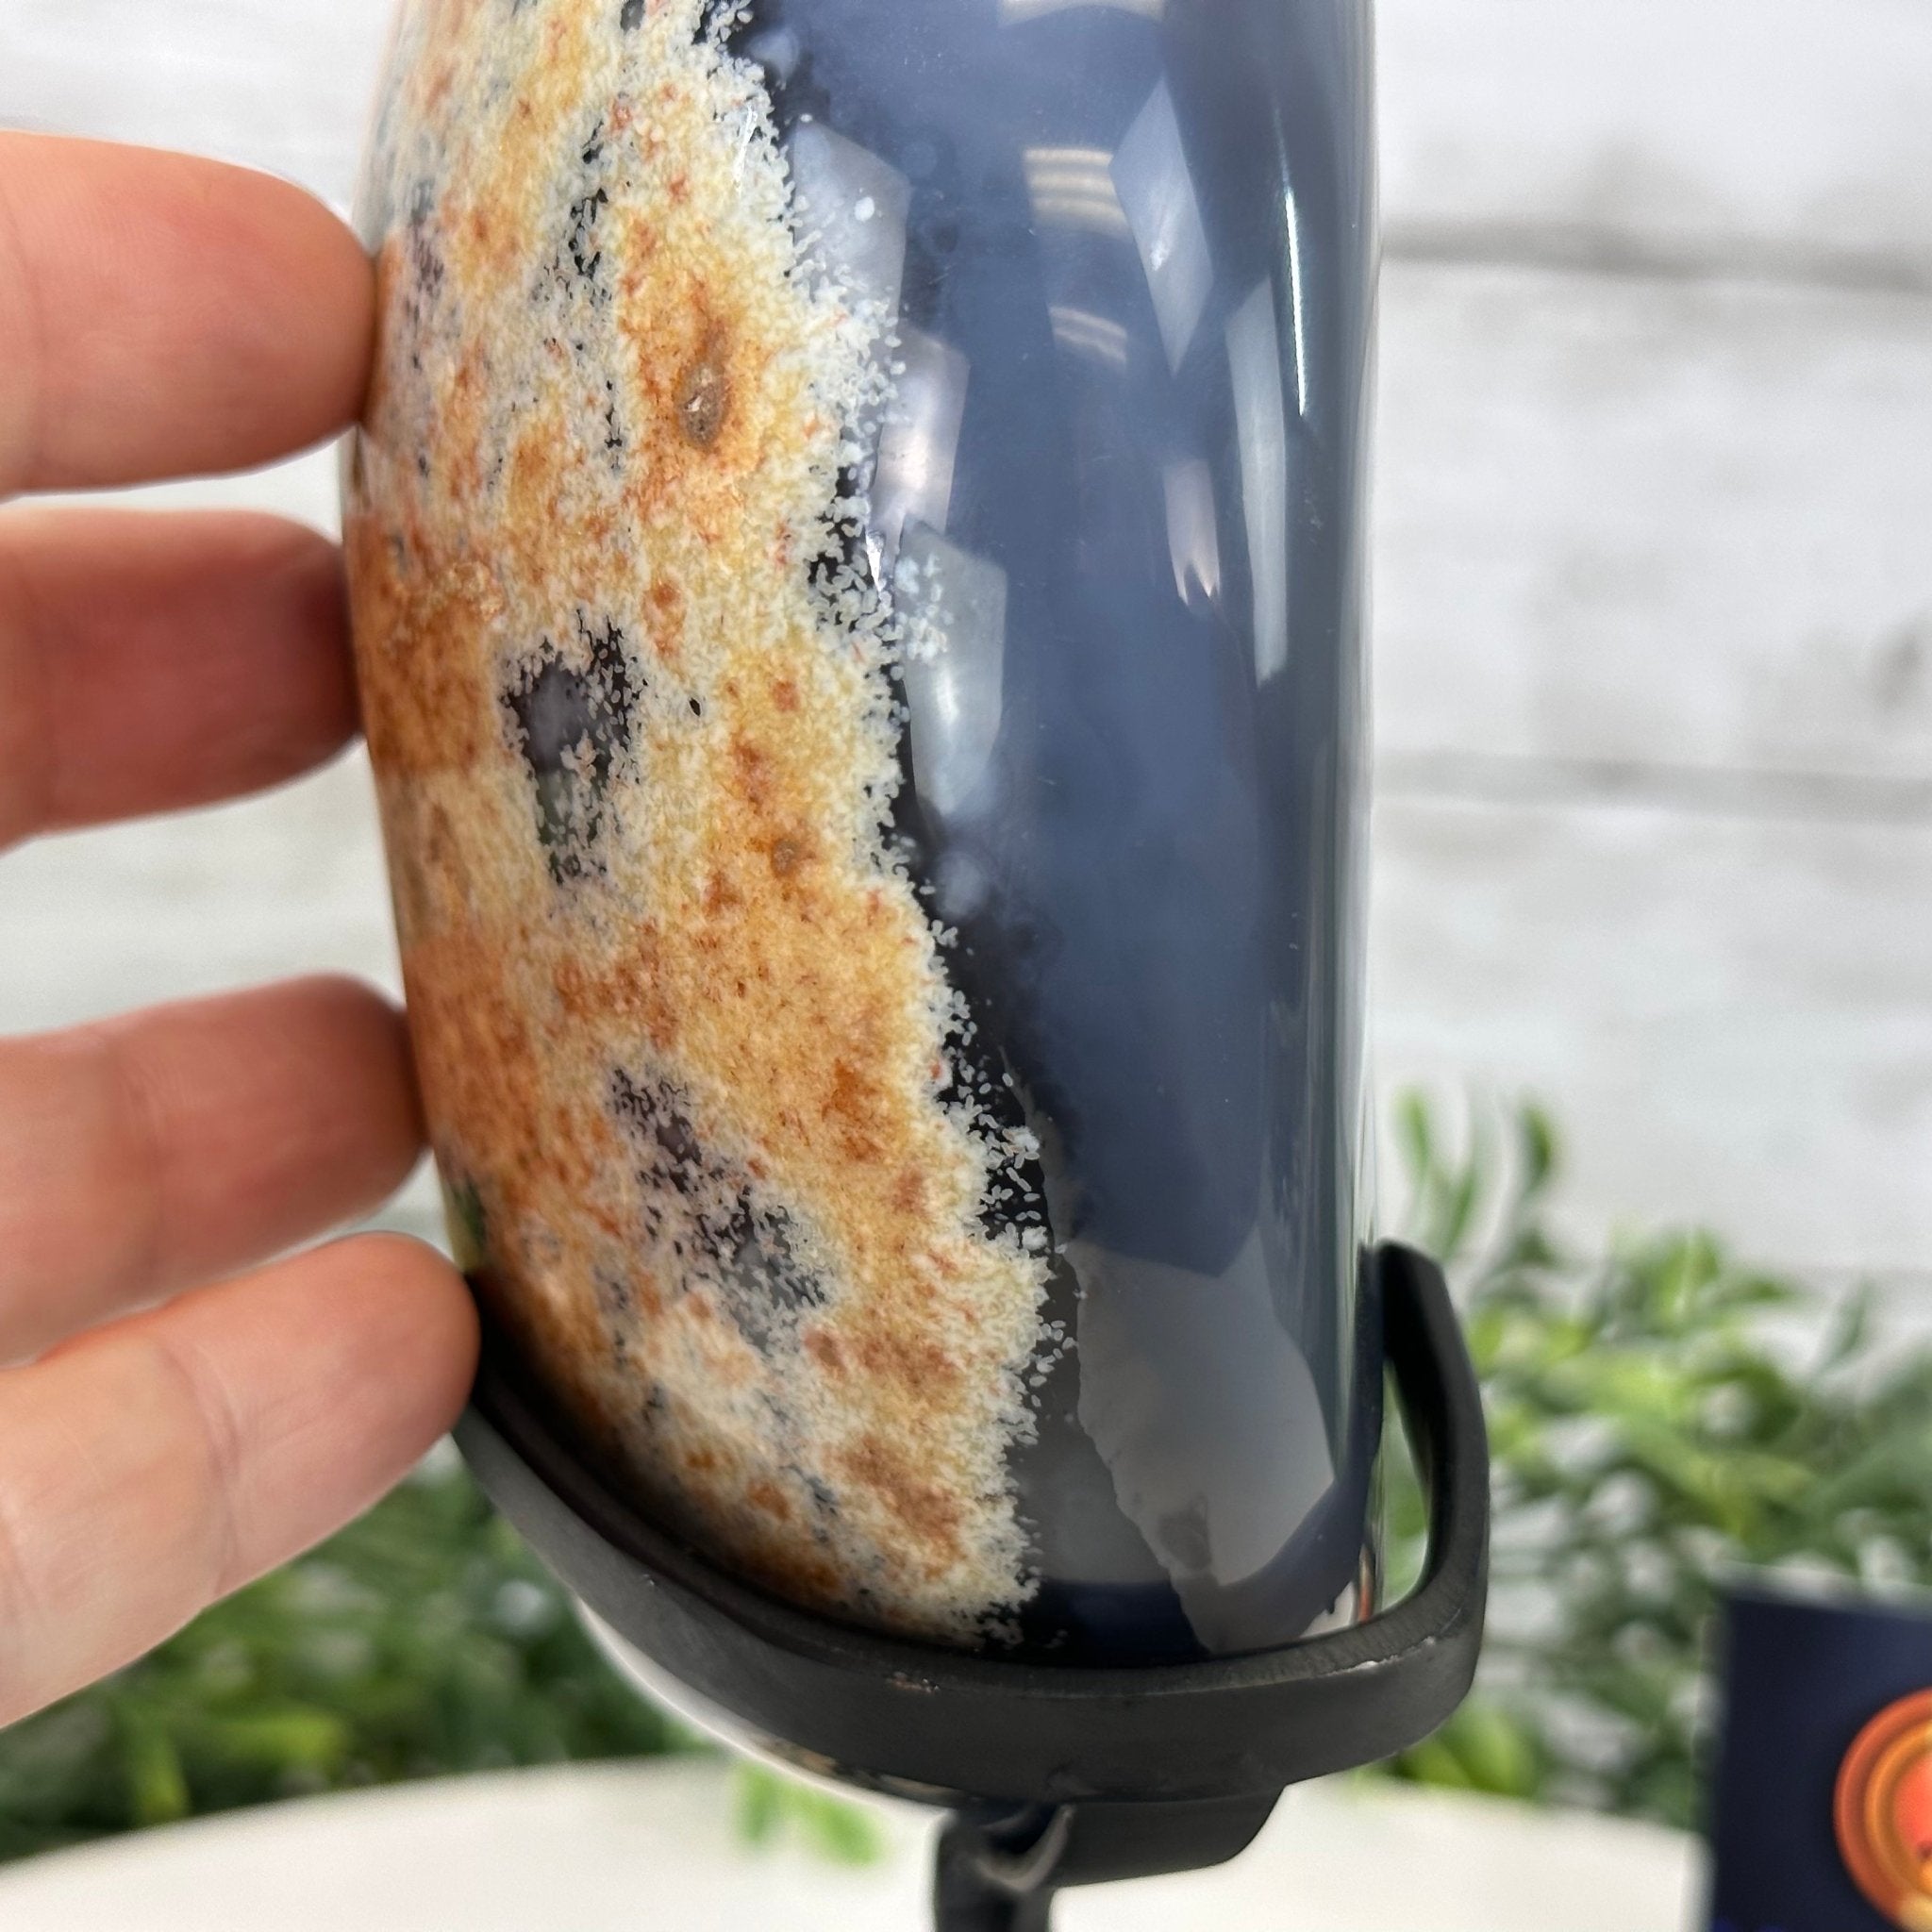 Polished Agate Crescent Moon on a Stand, 4.8 lbs & 9.4" Tall #5740NA-005 - Brazil GemsBrazil GemsPolished Agate Crescent Moon on a Stand, 4.8 lbs & 9.4" Tall #5740NA-005Crescent Moons5740NA-005